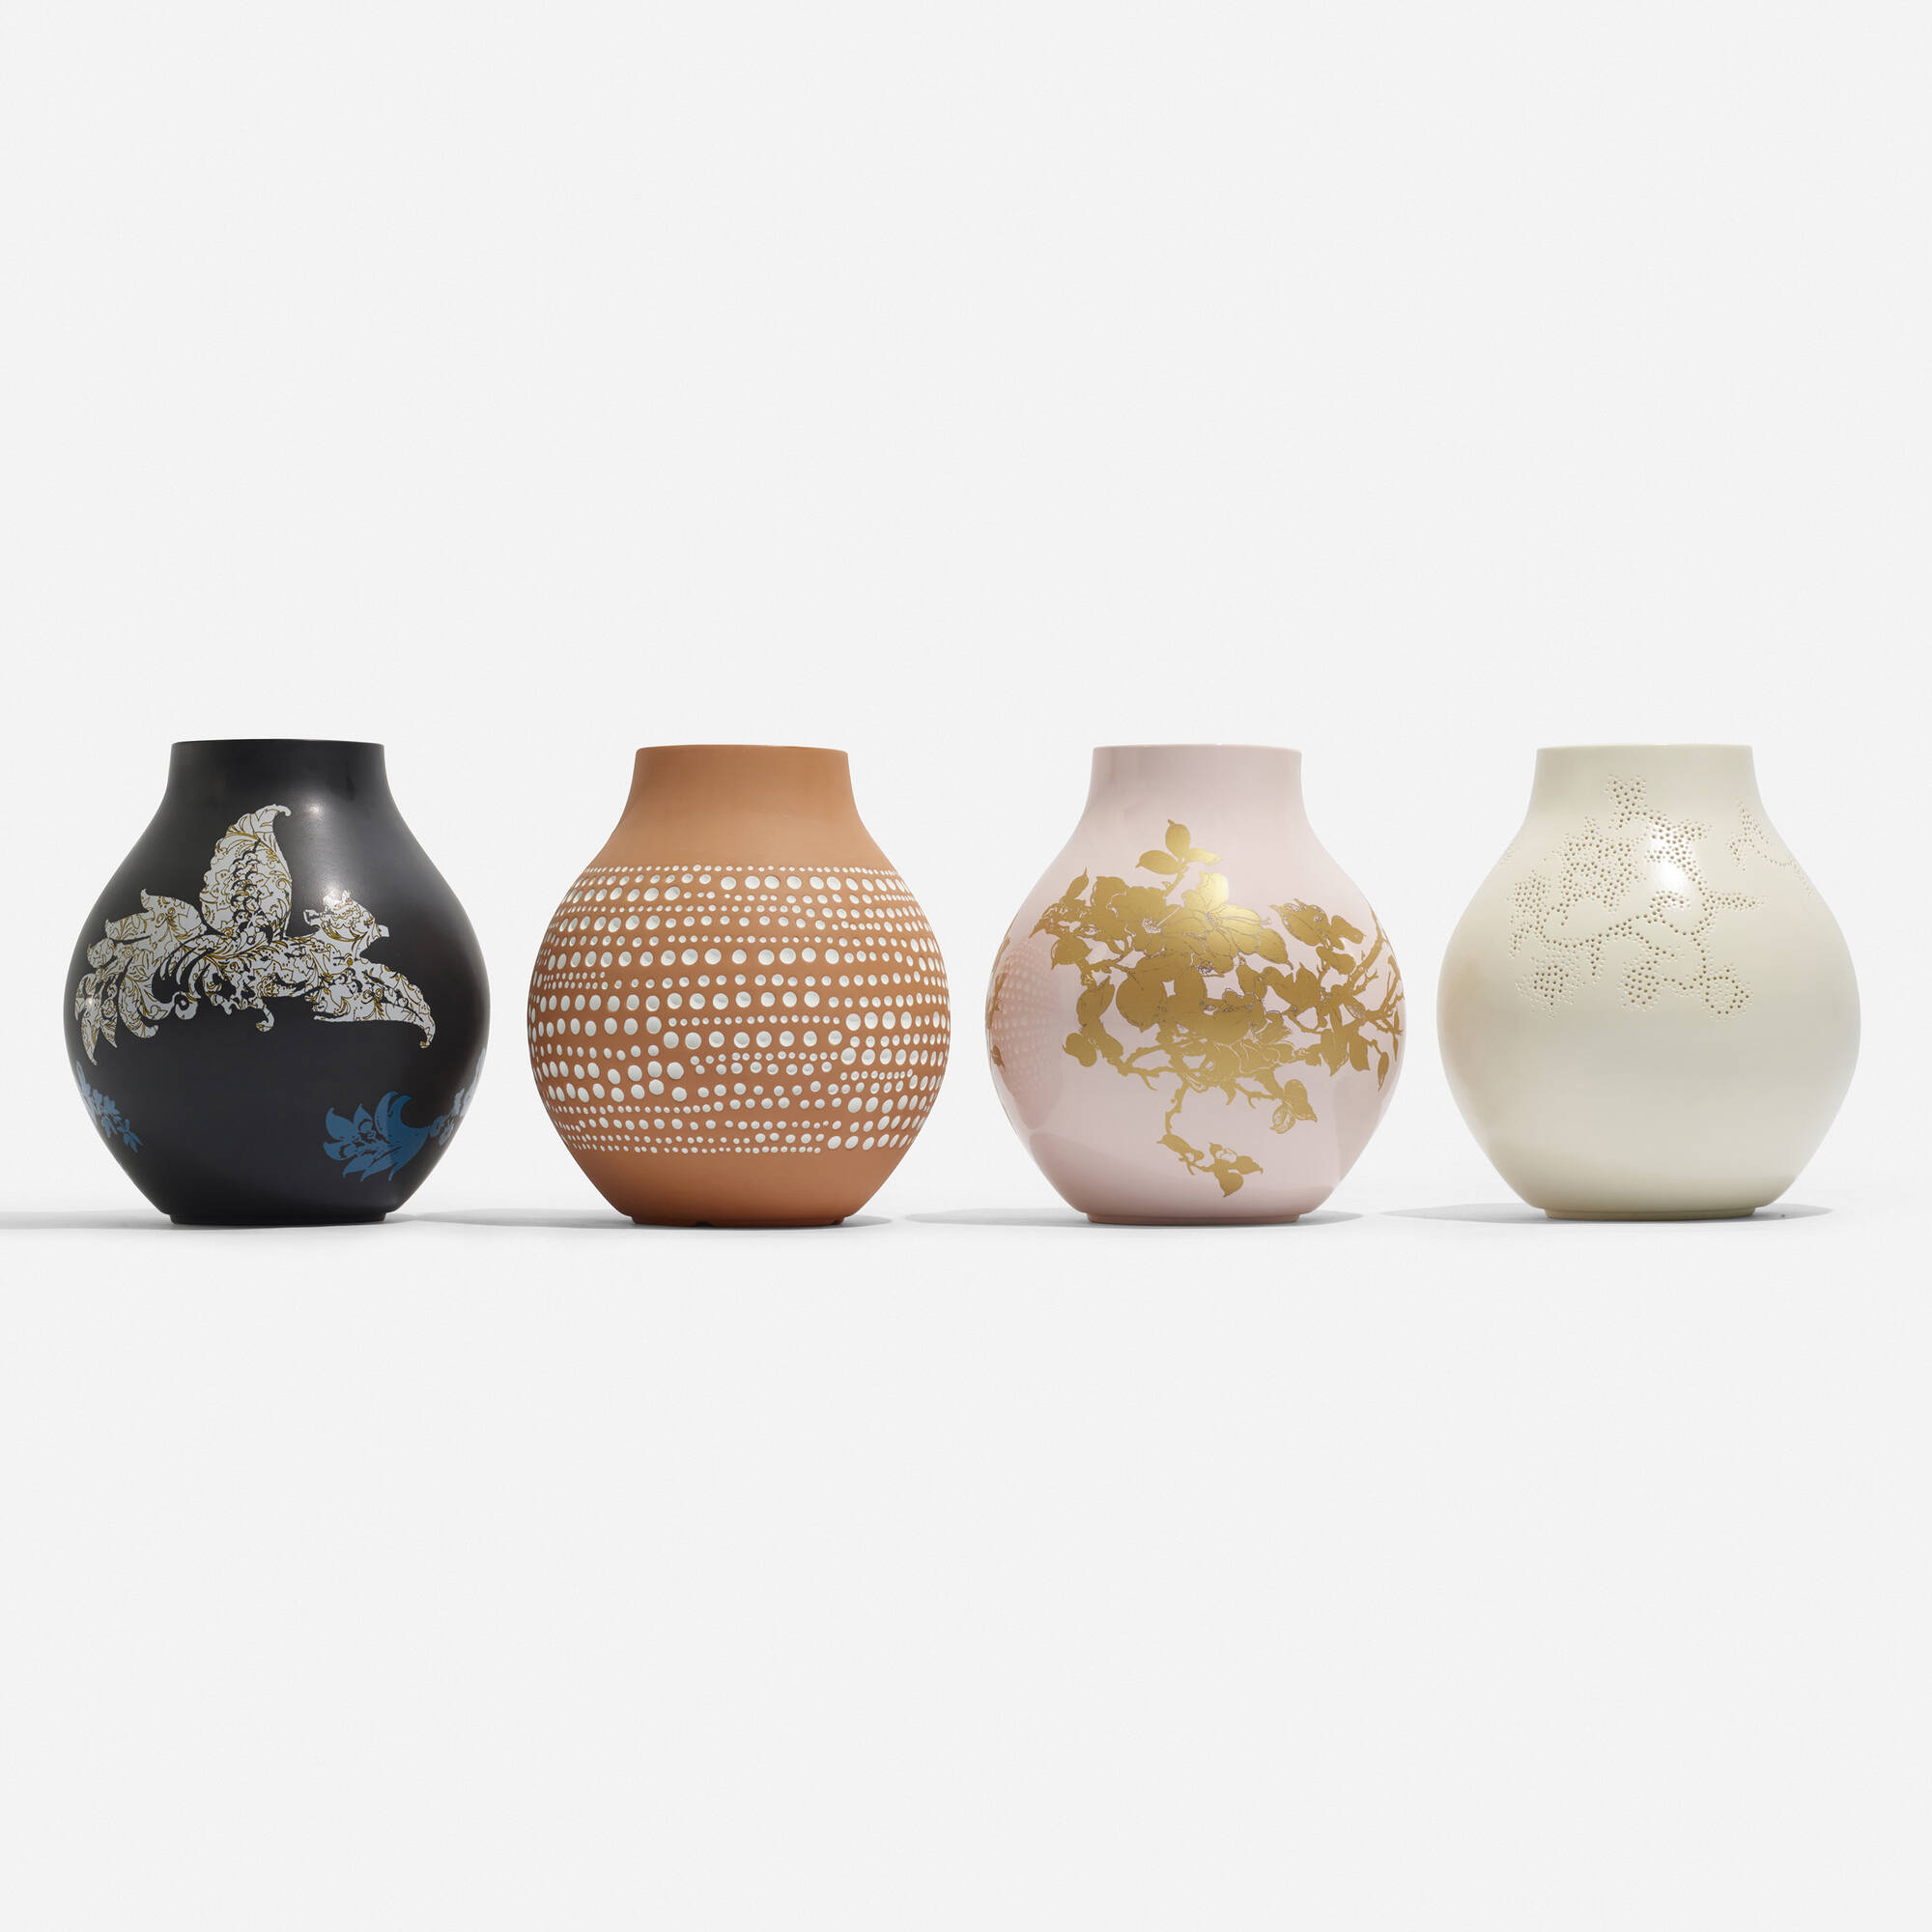 bal iets Dierentuin 151: HELLA JONGERIUS, vases, set of four < Champion 100, 29 October 2020 <  Auctions | Wright: Auctions of Art and Design